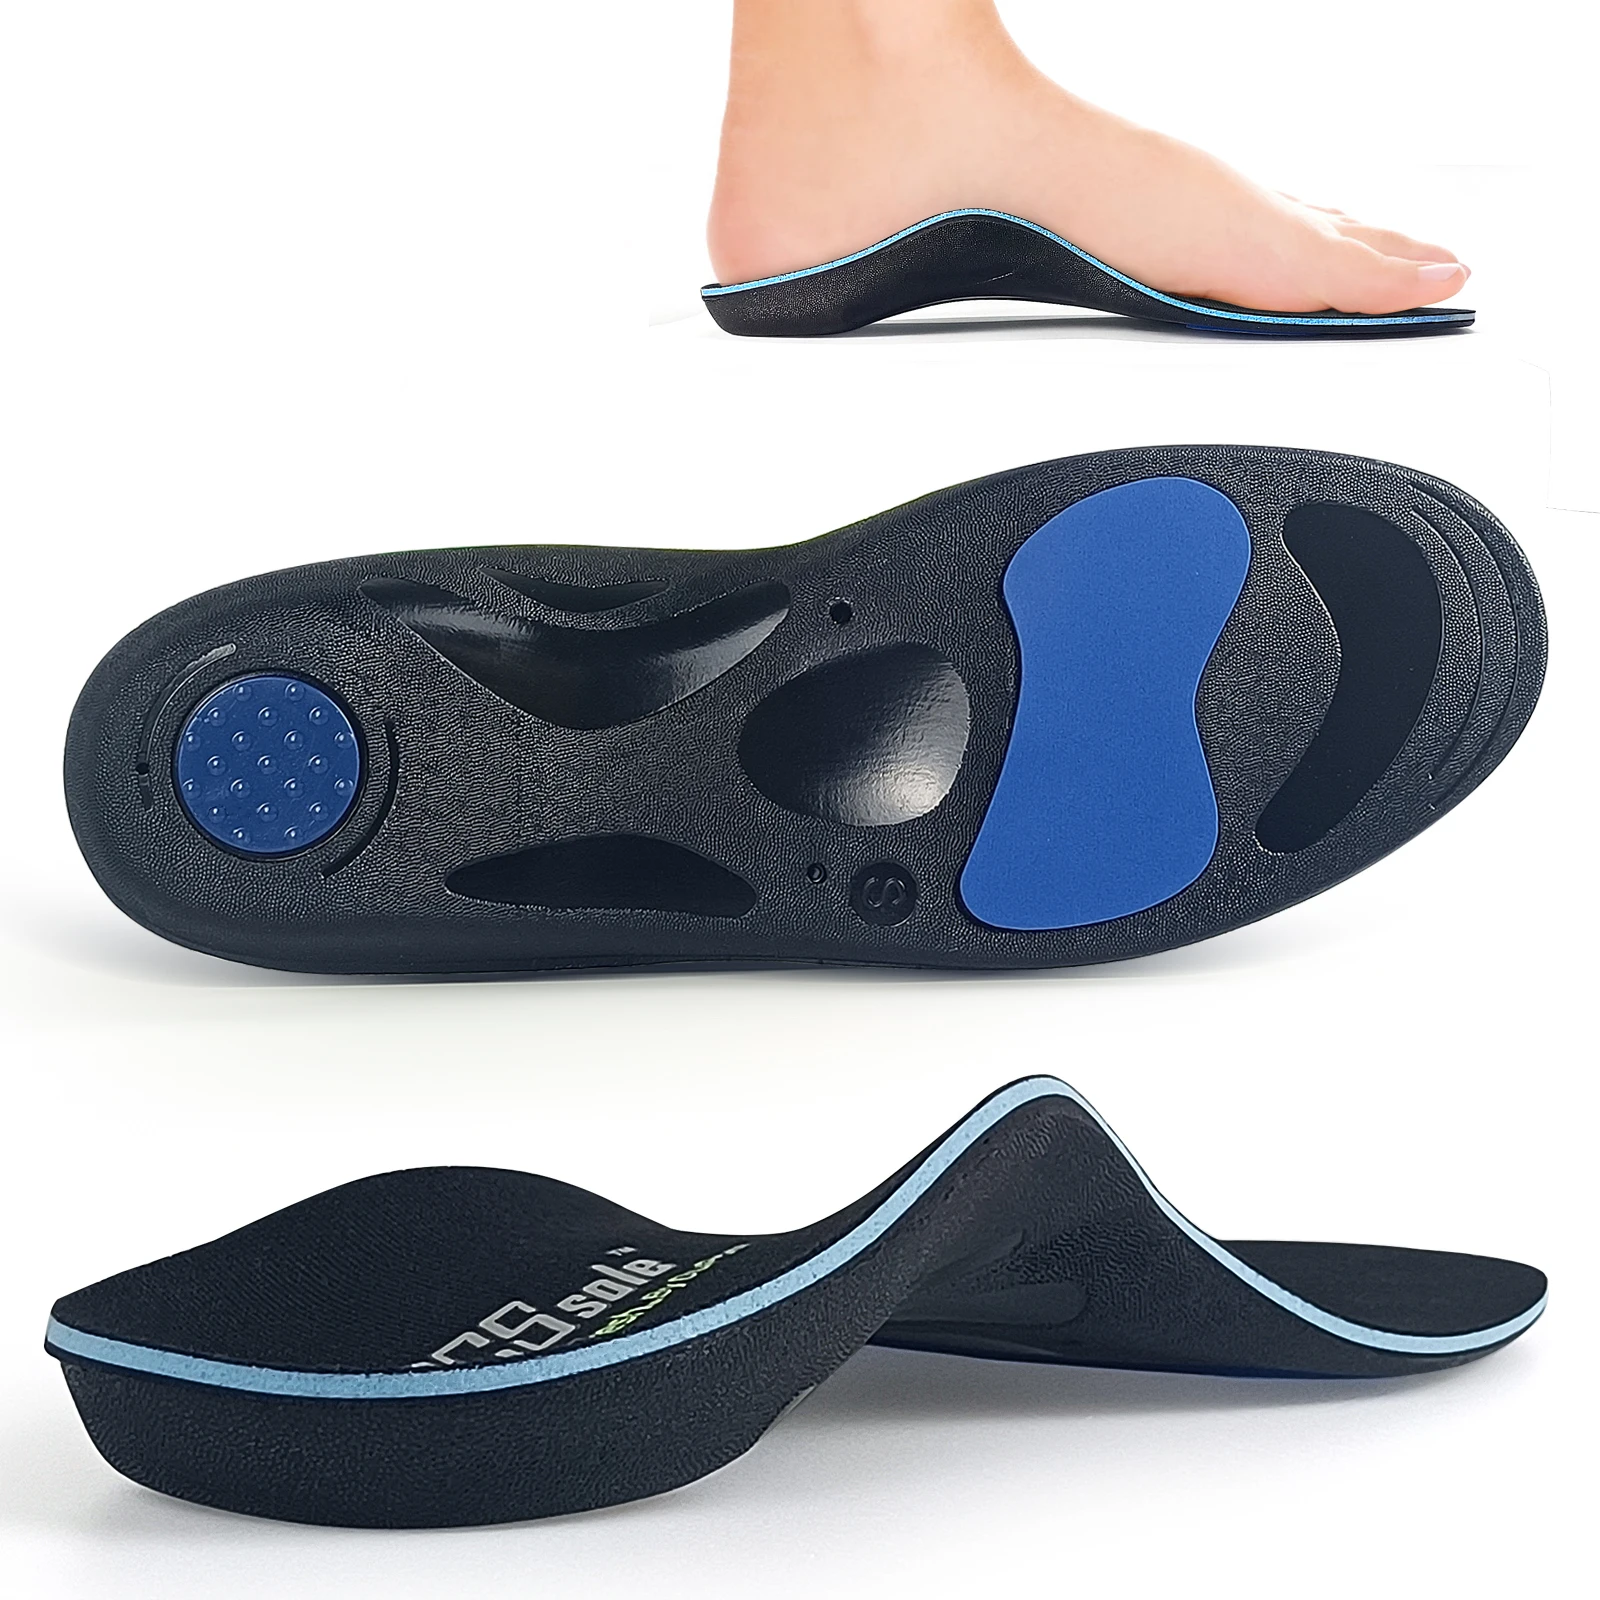 

PCSsole Gel Orthopedic 3.5cm Height Arch Support Insoles PU Memory Foam Insole Inserts for Flat Feet Plantar Fasciitis Feet Pain